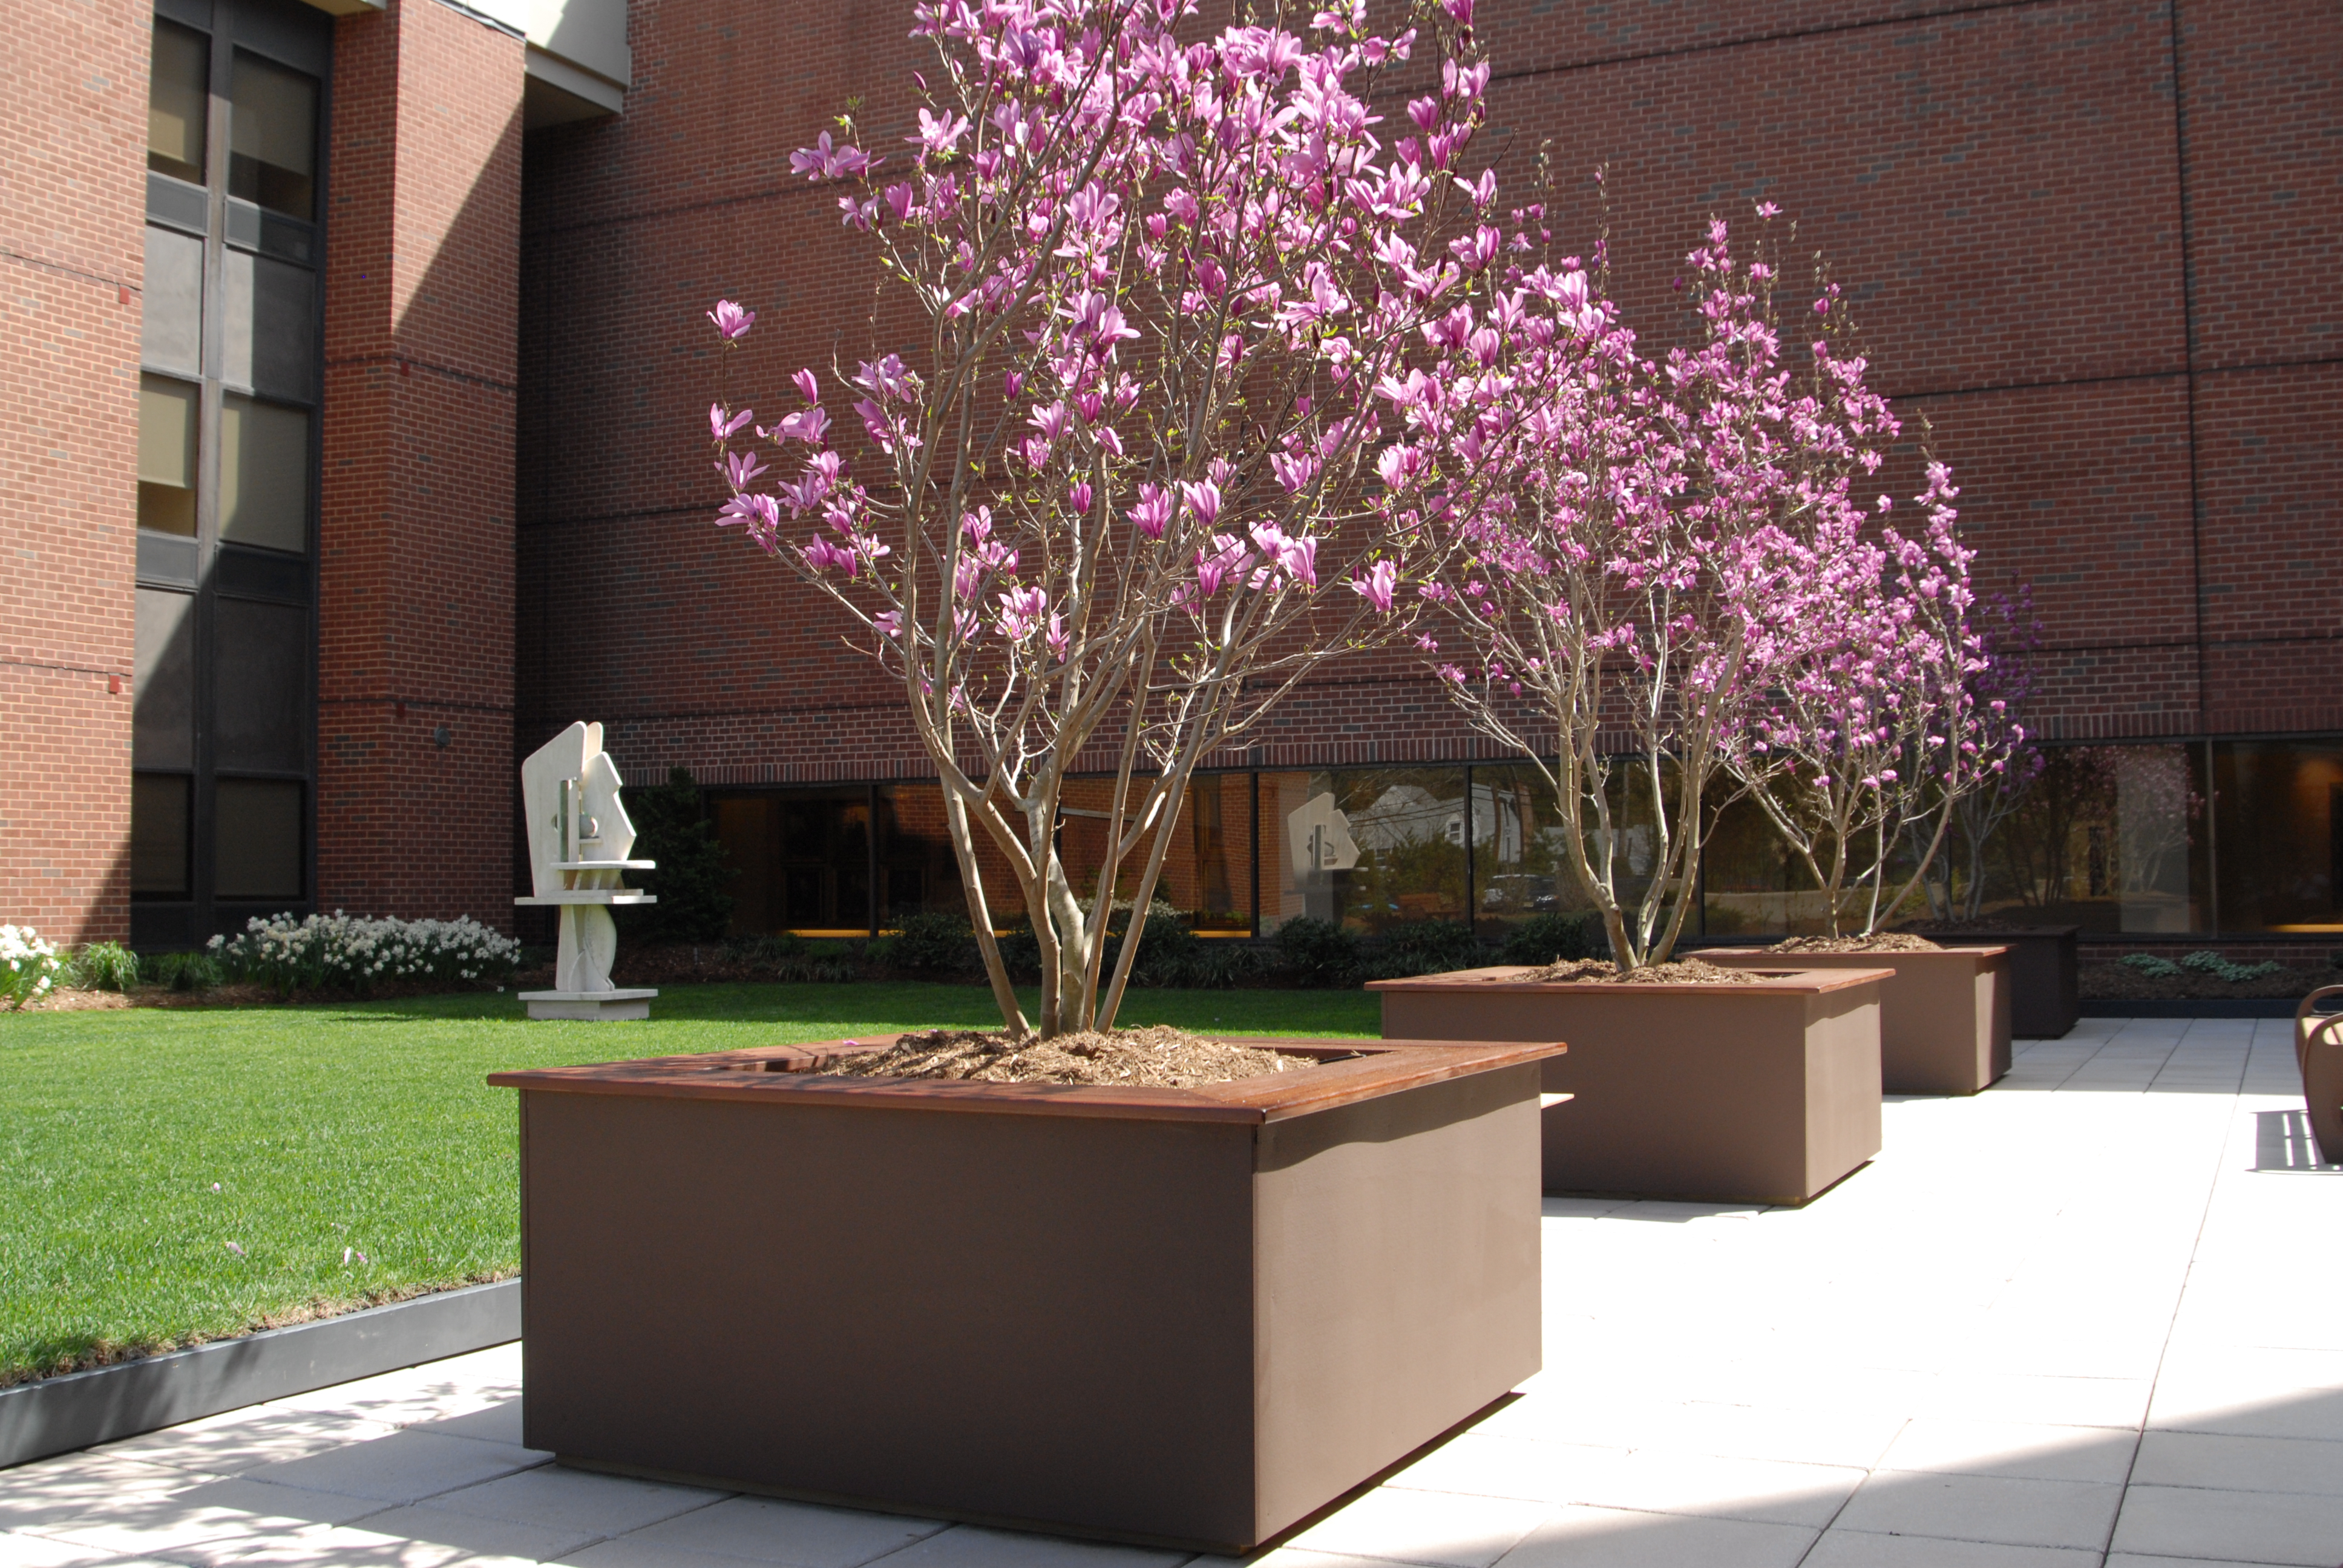 The Friendship Garden at The Valley Hospital